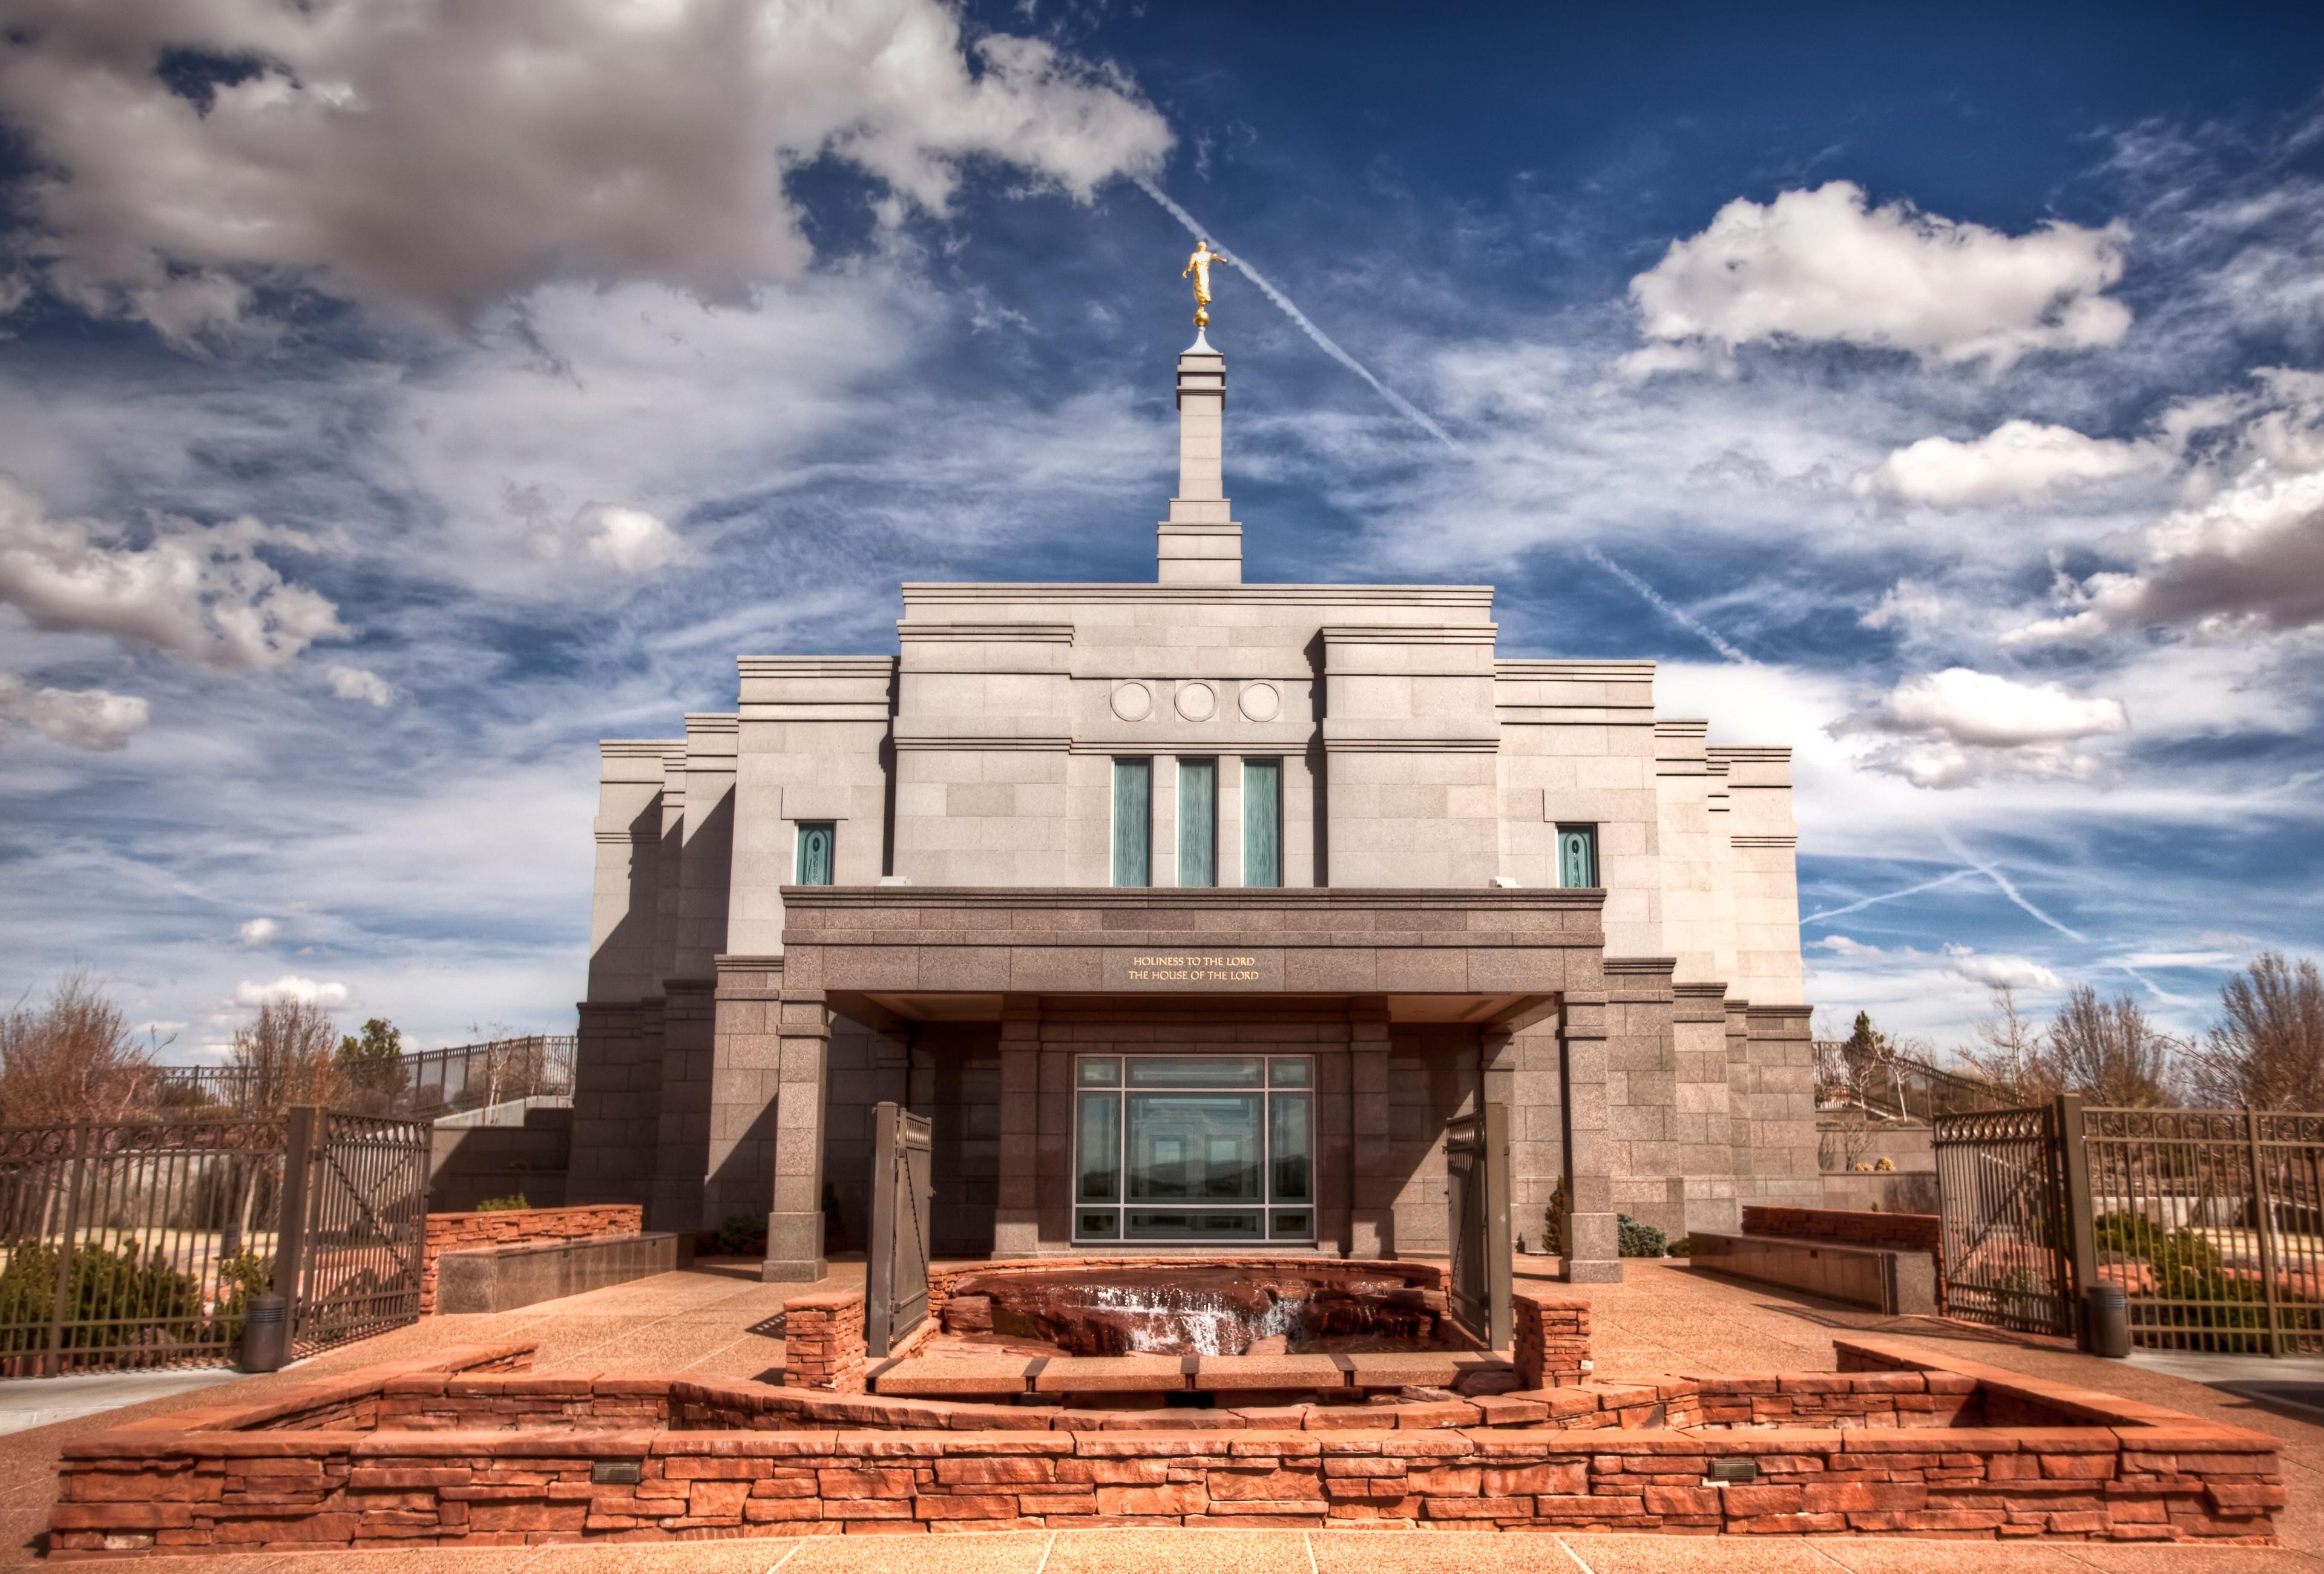 The Snowflake Arizona Temple and its entrance, with large white clouds overhead.